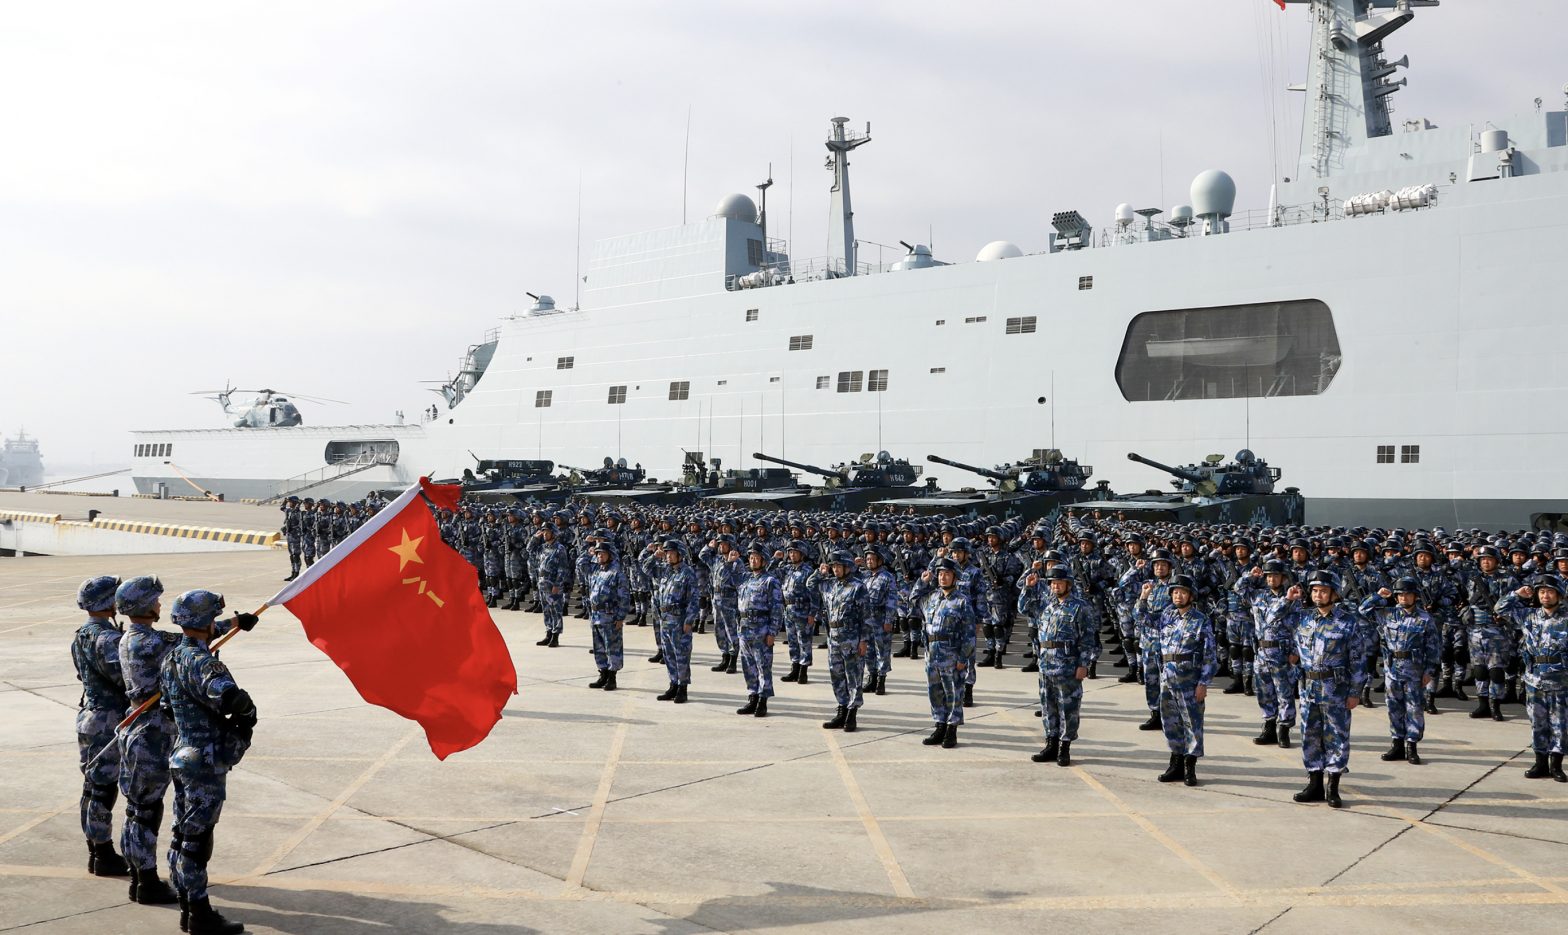 A Rising Dragon: Analyzing the Strategic Implications of China’s Posture Amid the Global Security Scenario